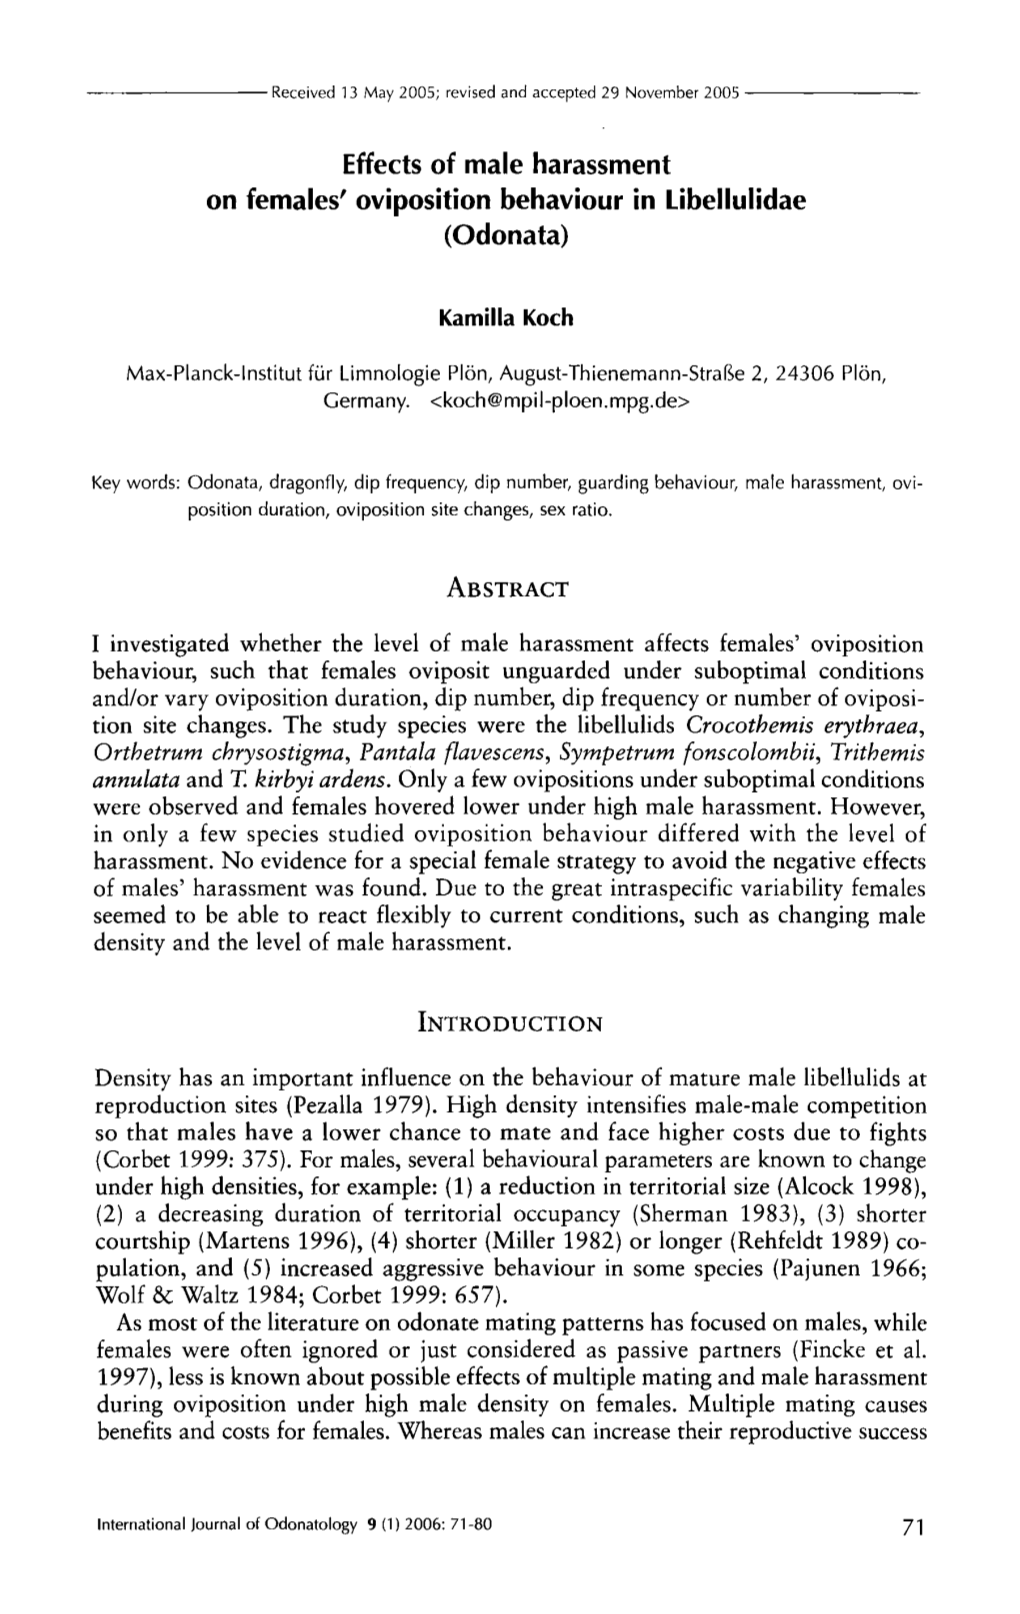 Effects of Male Harassment on Females' Oviposition Behaviour in Libellulidae (Odonata)